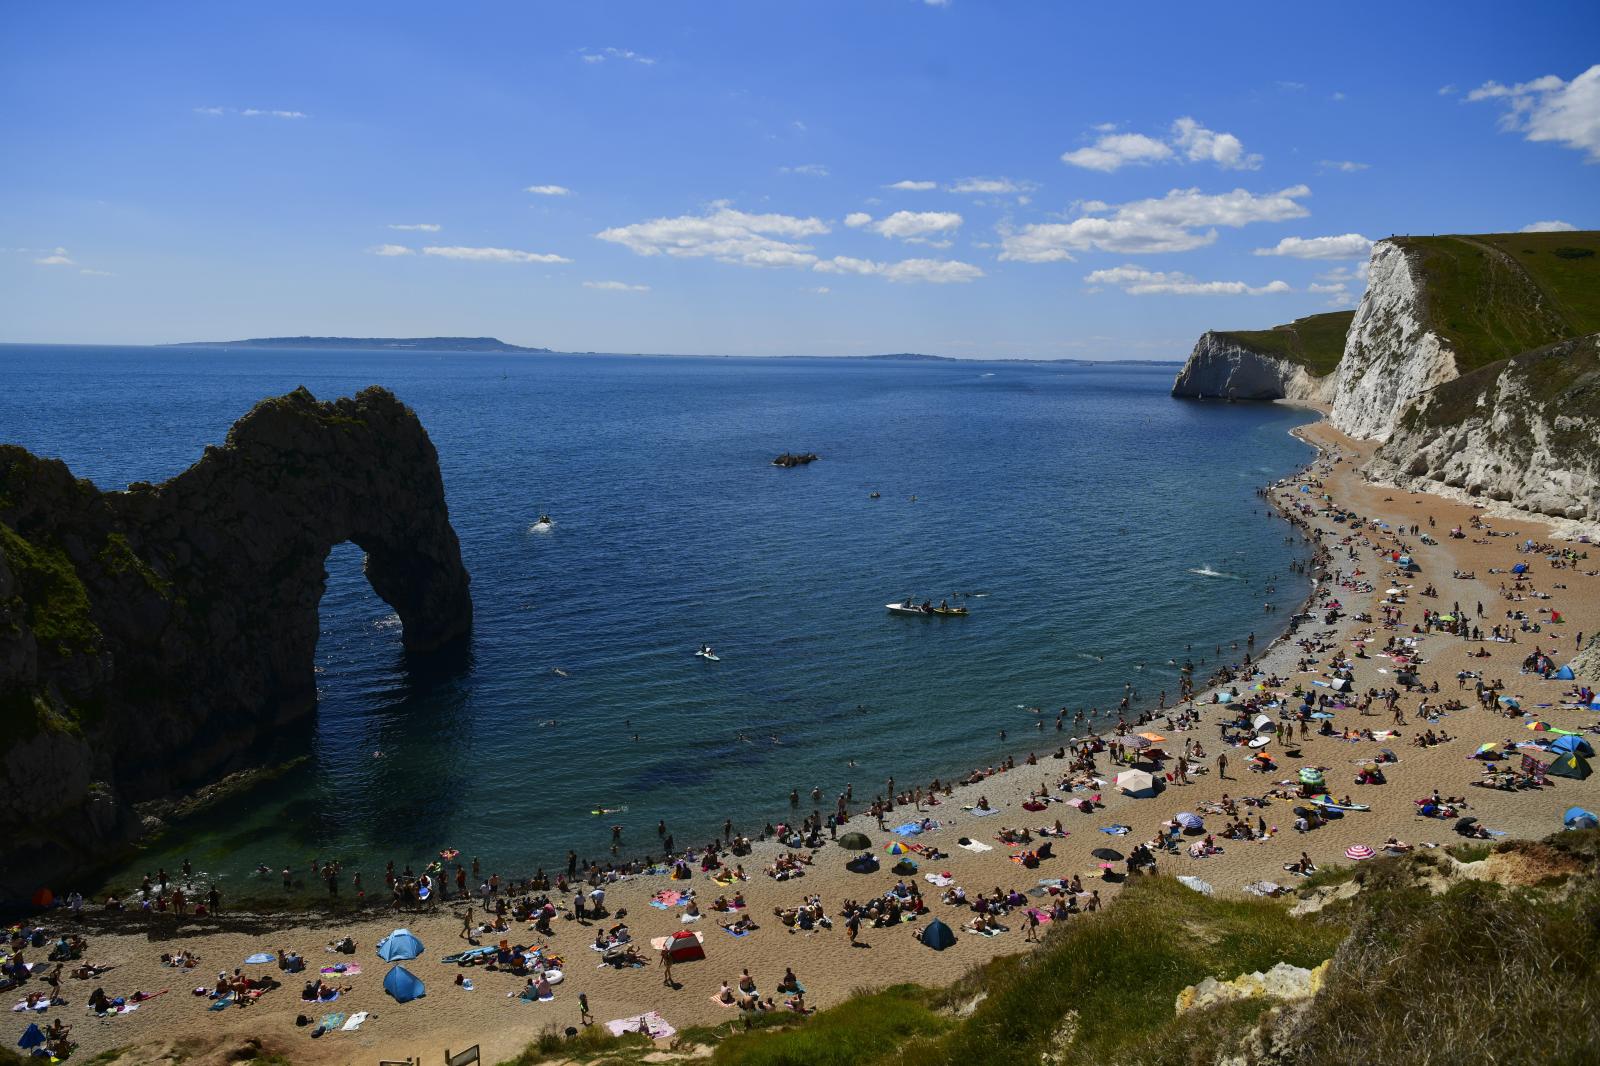 Image from Daily Life UK - Durdle Door near Bournemouth